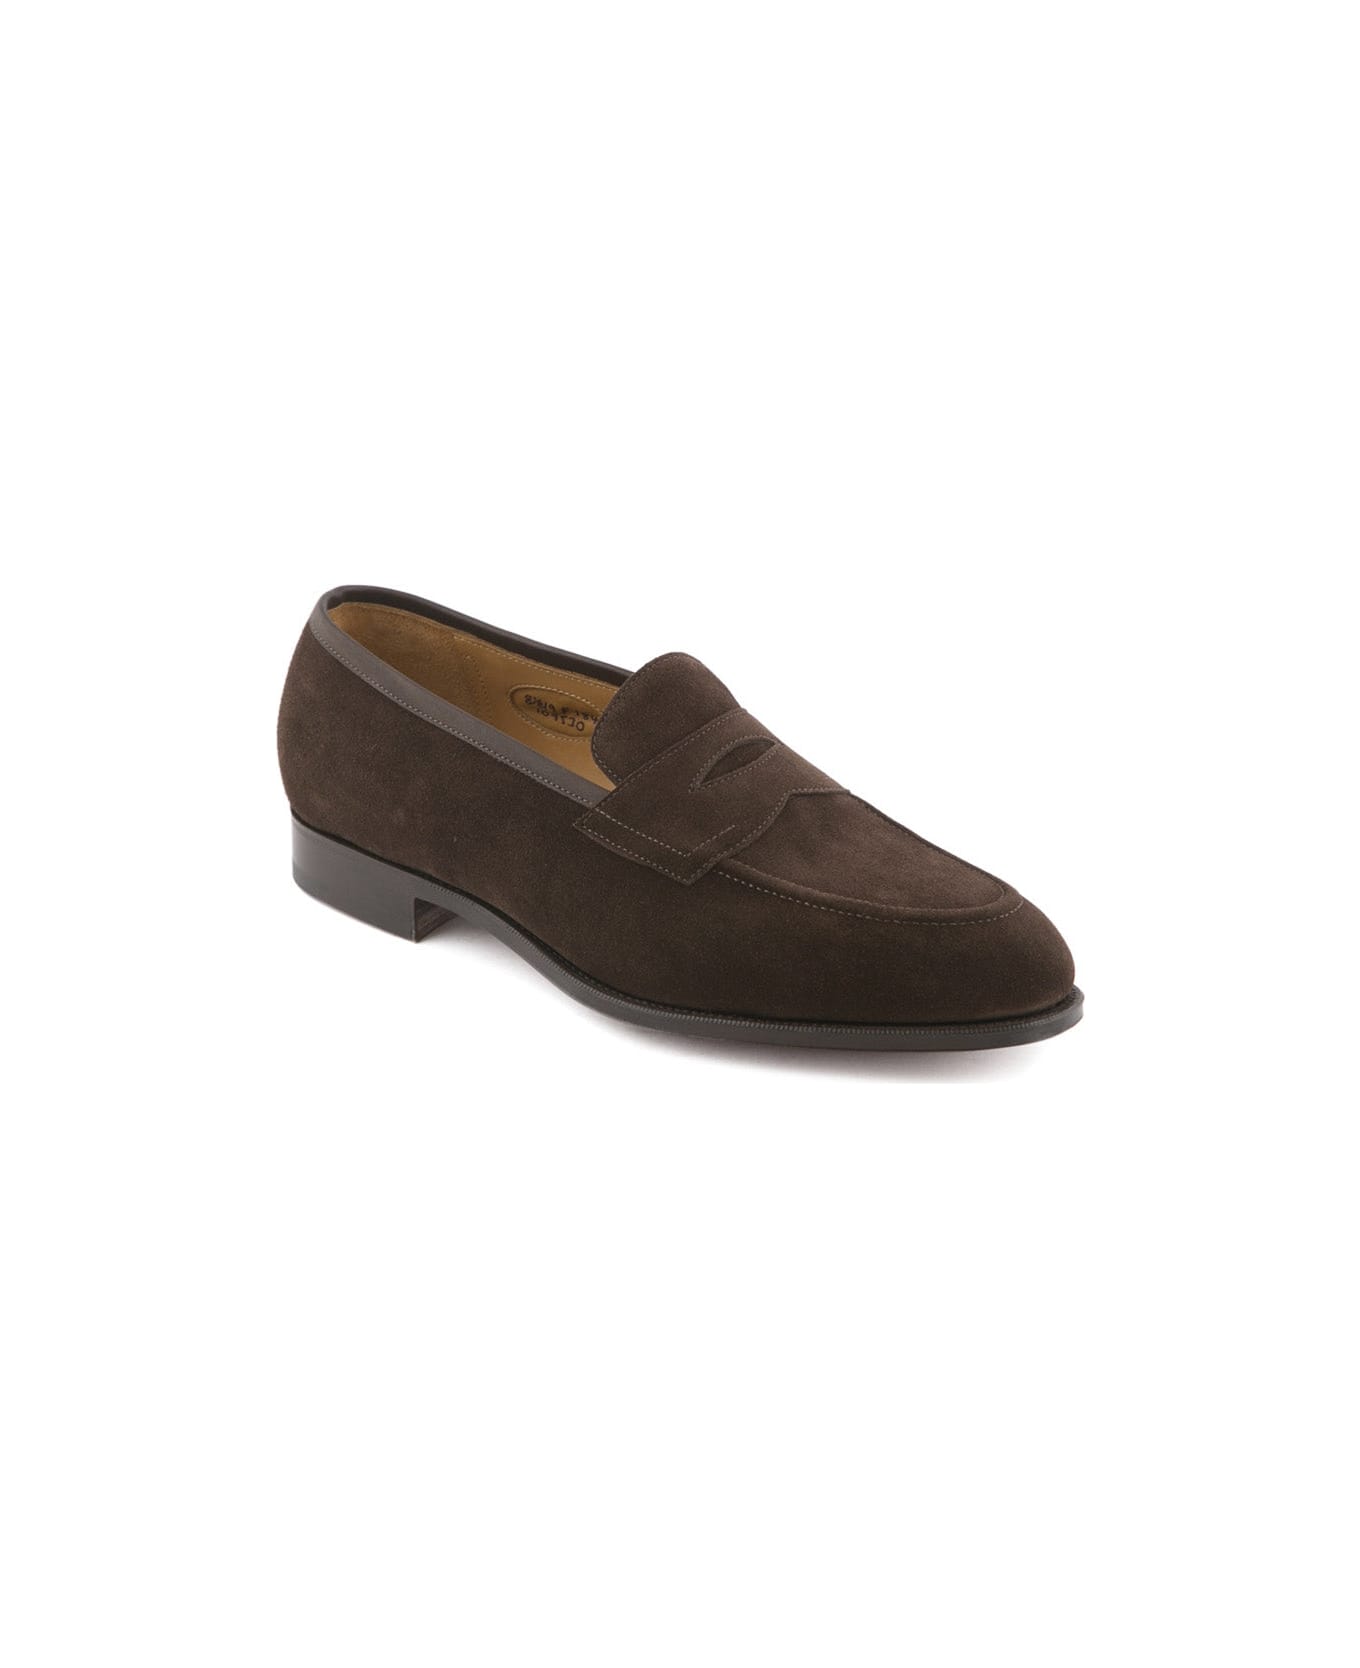 Edward Green Piccadilly Mocca Suede Penny Loafer - Marrone